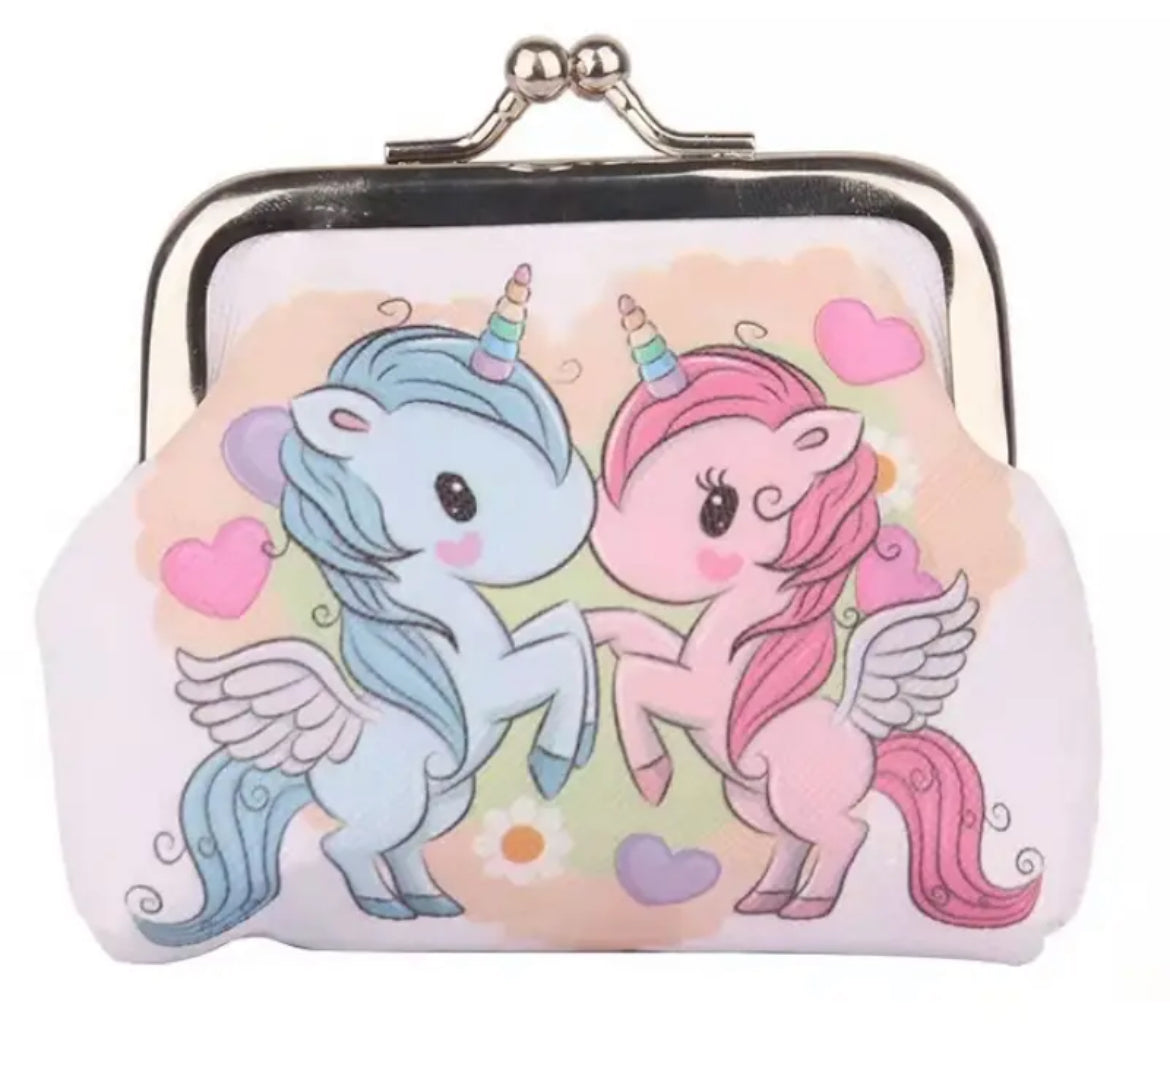 My Little Pony Unicorn Coin Purse, Bringing Back The 80’s 🌈🦄 Collection